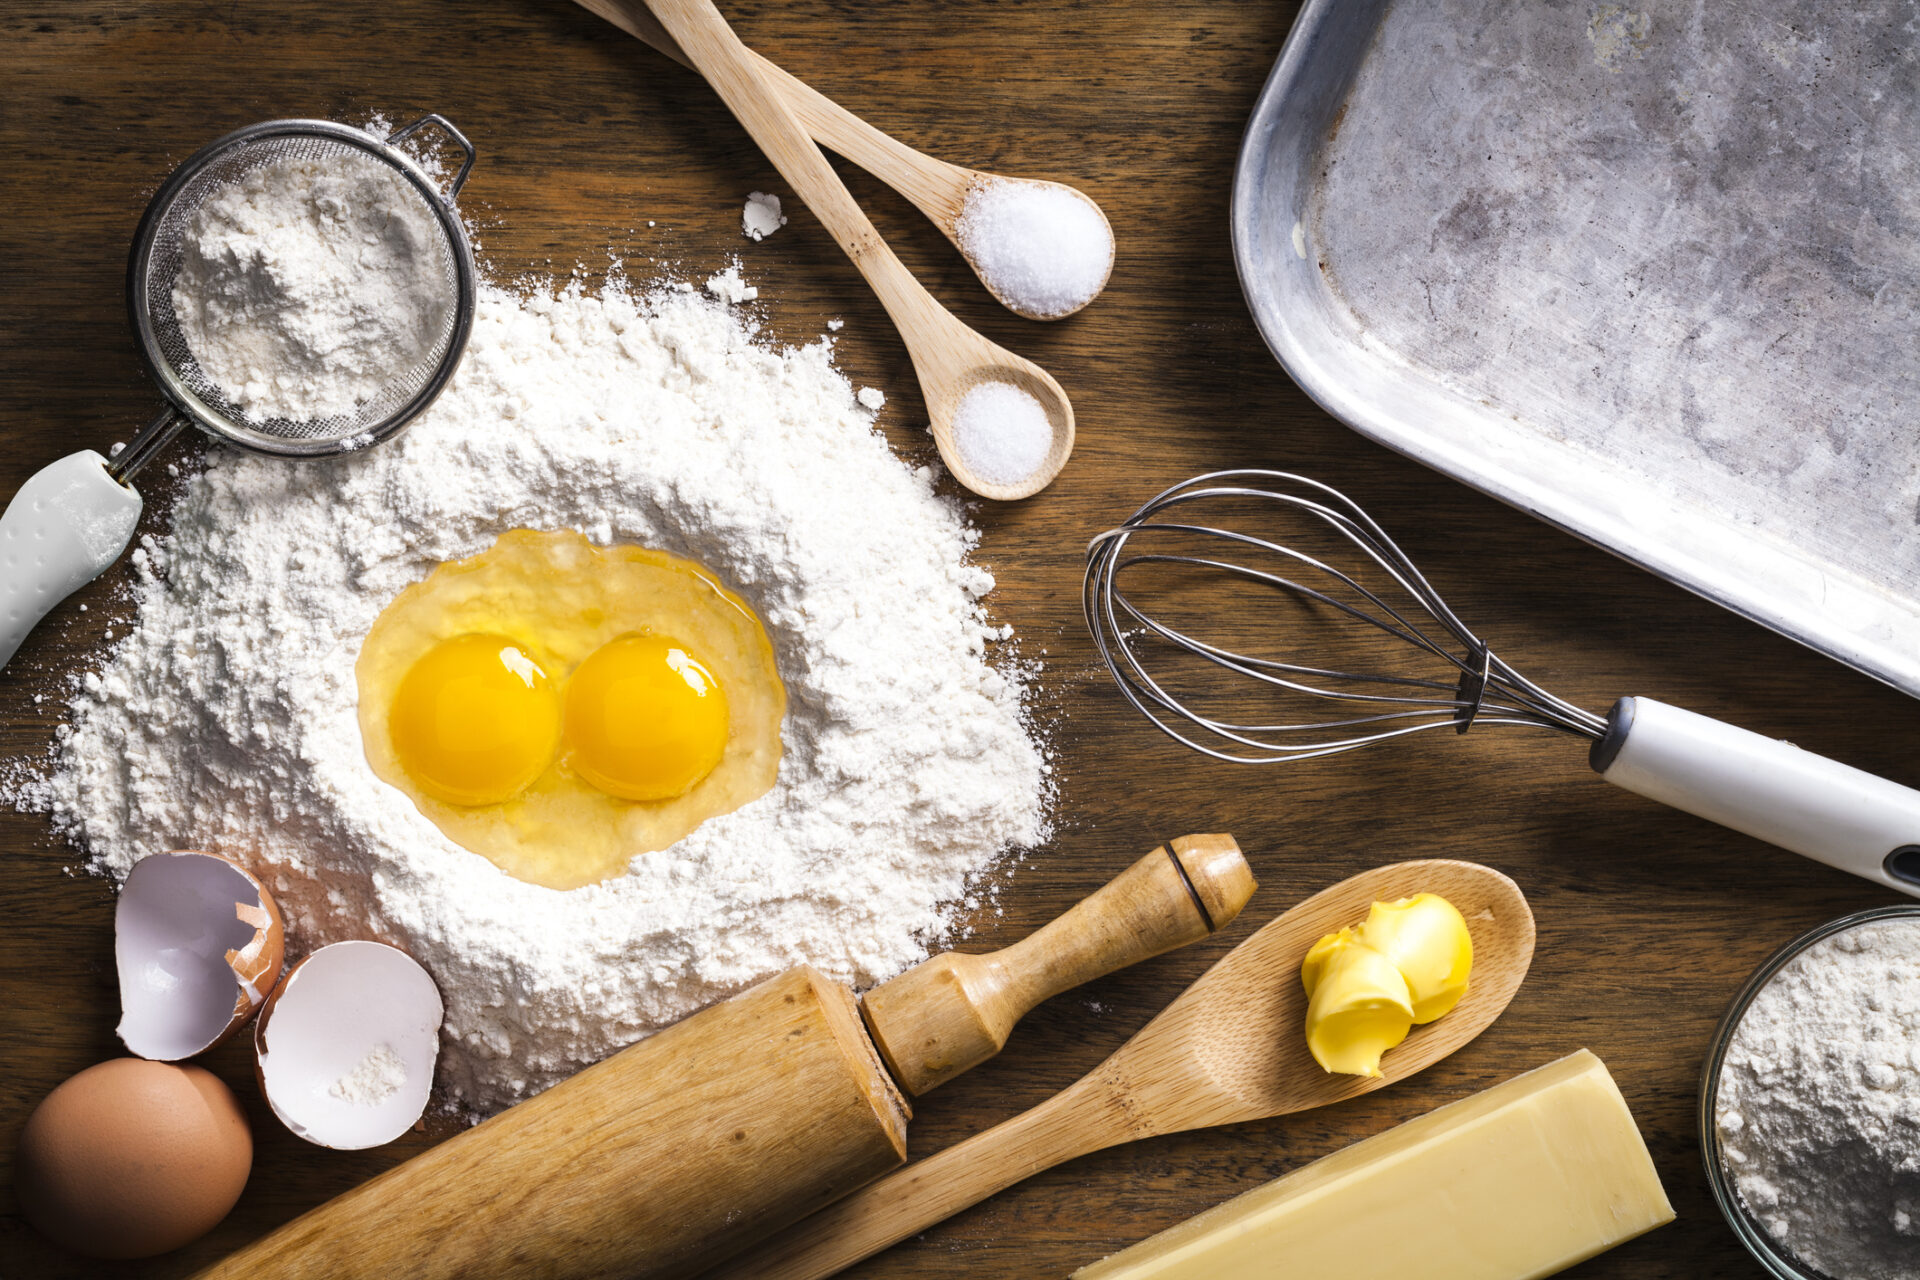 Baking involves a series of chemical reactions